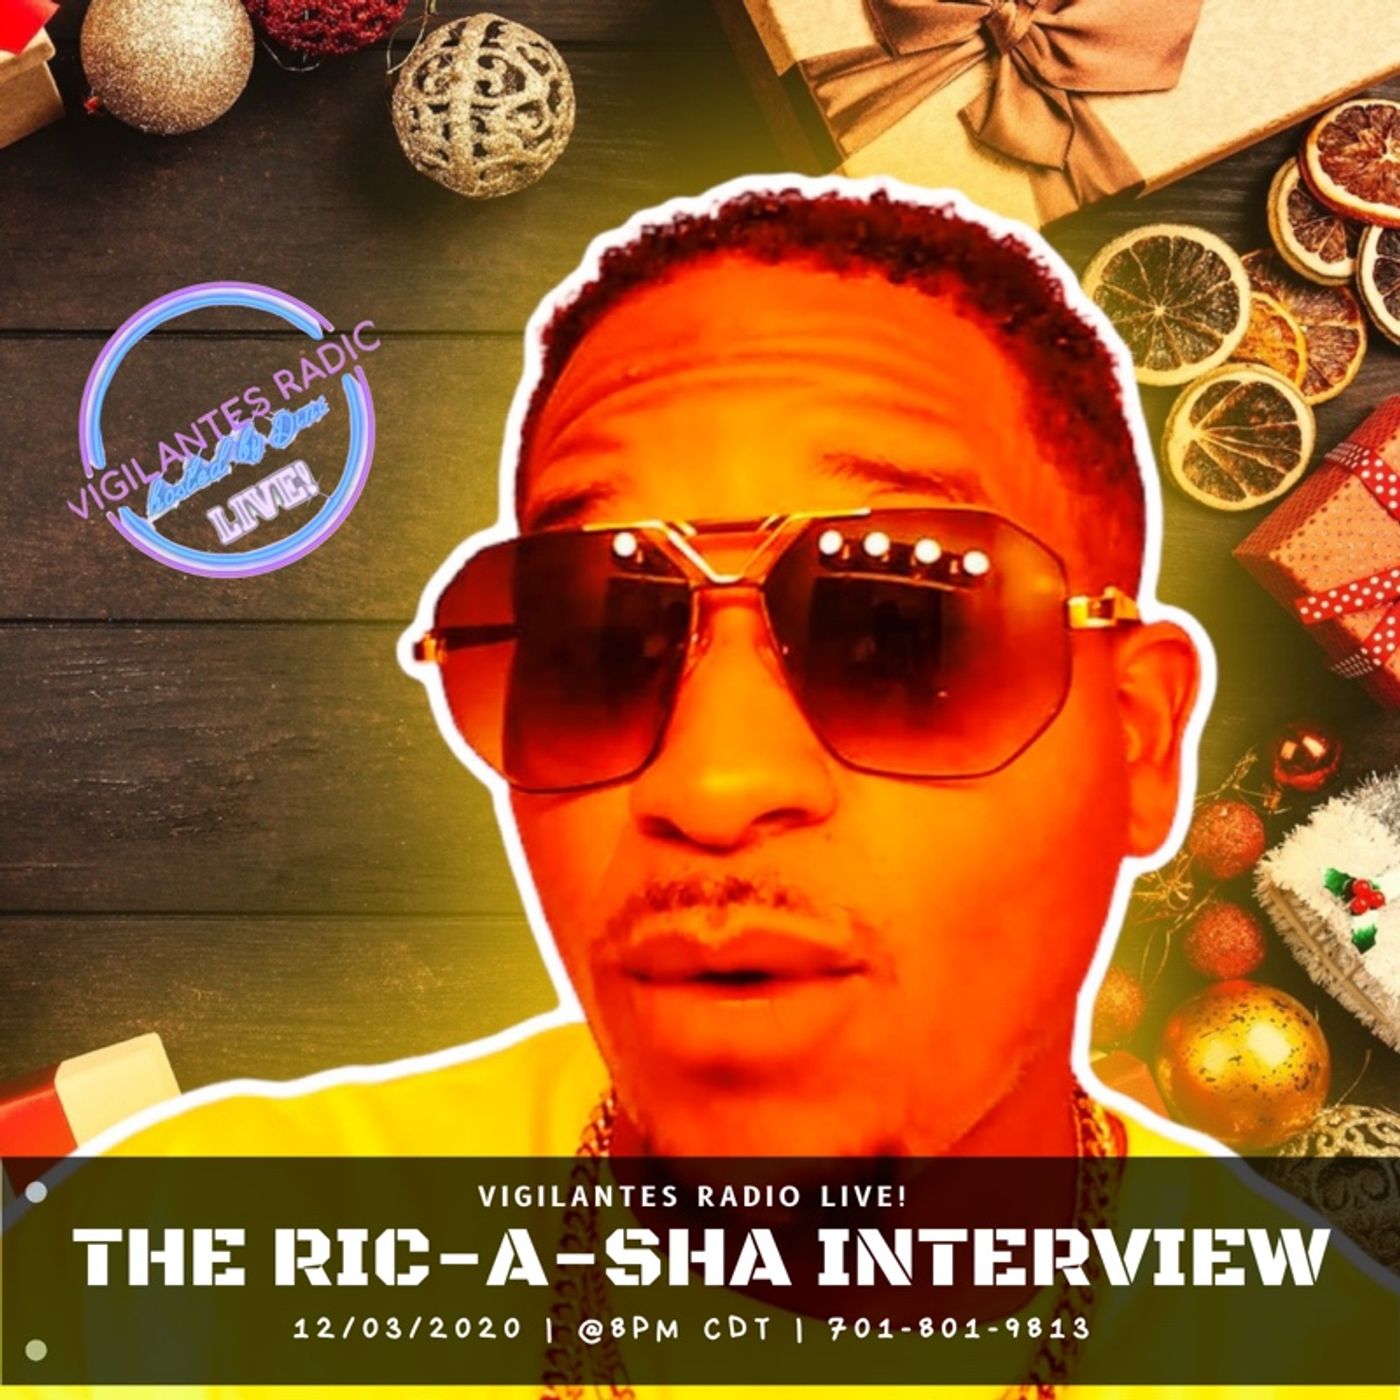 The Ric-A-Sha Interview. Image